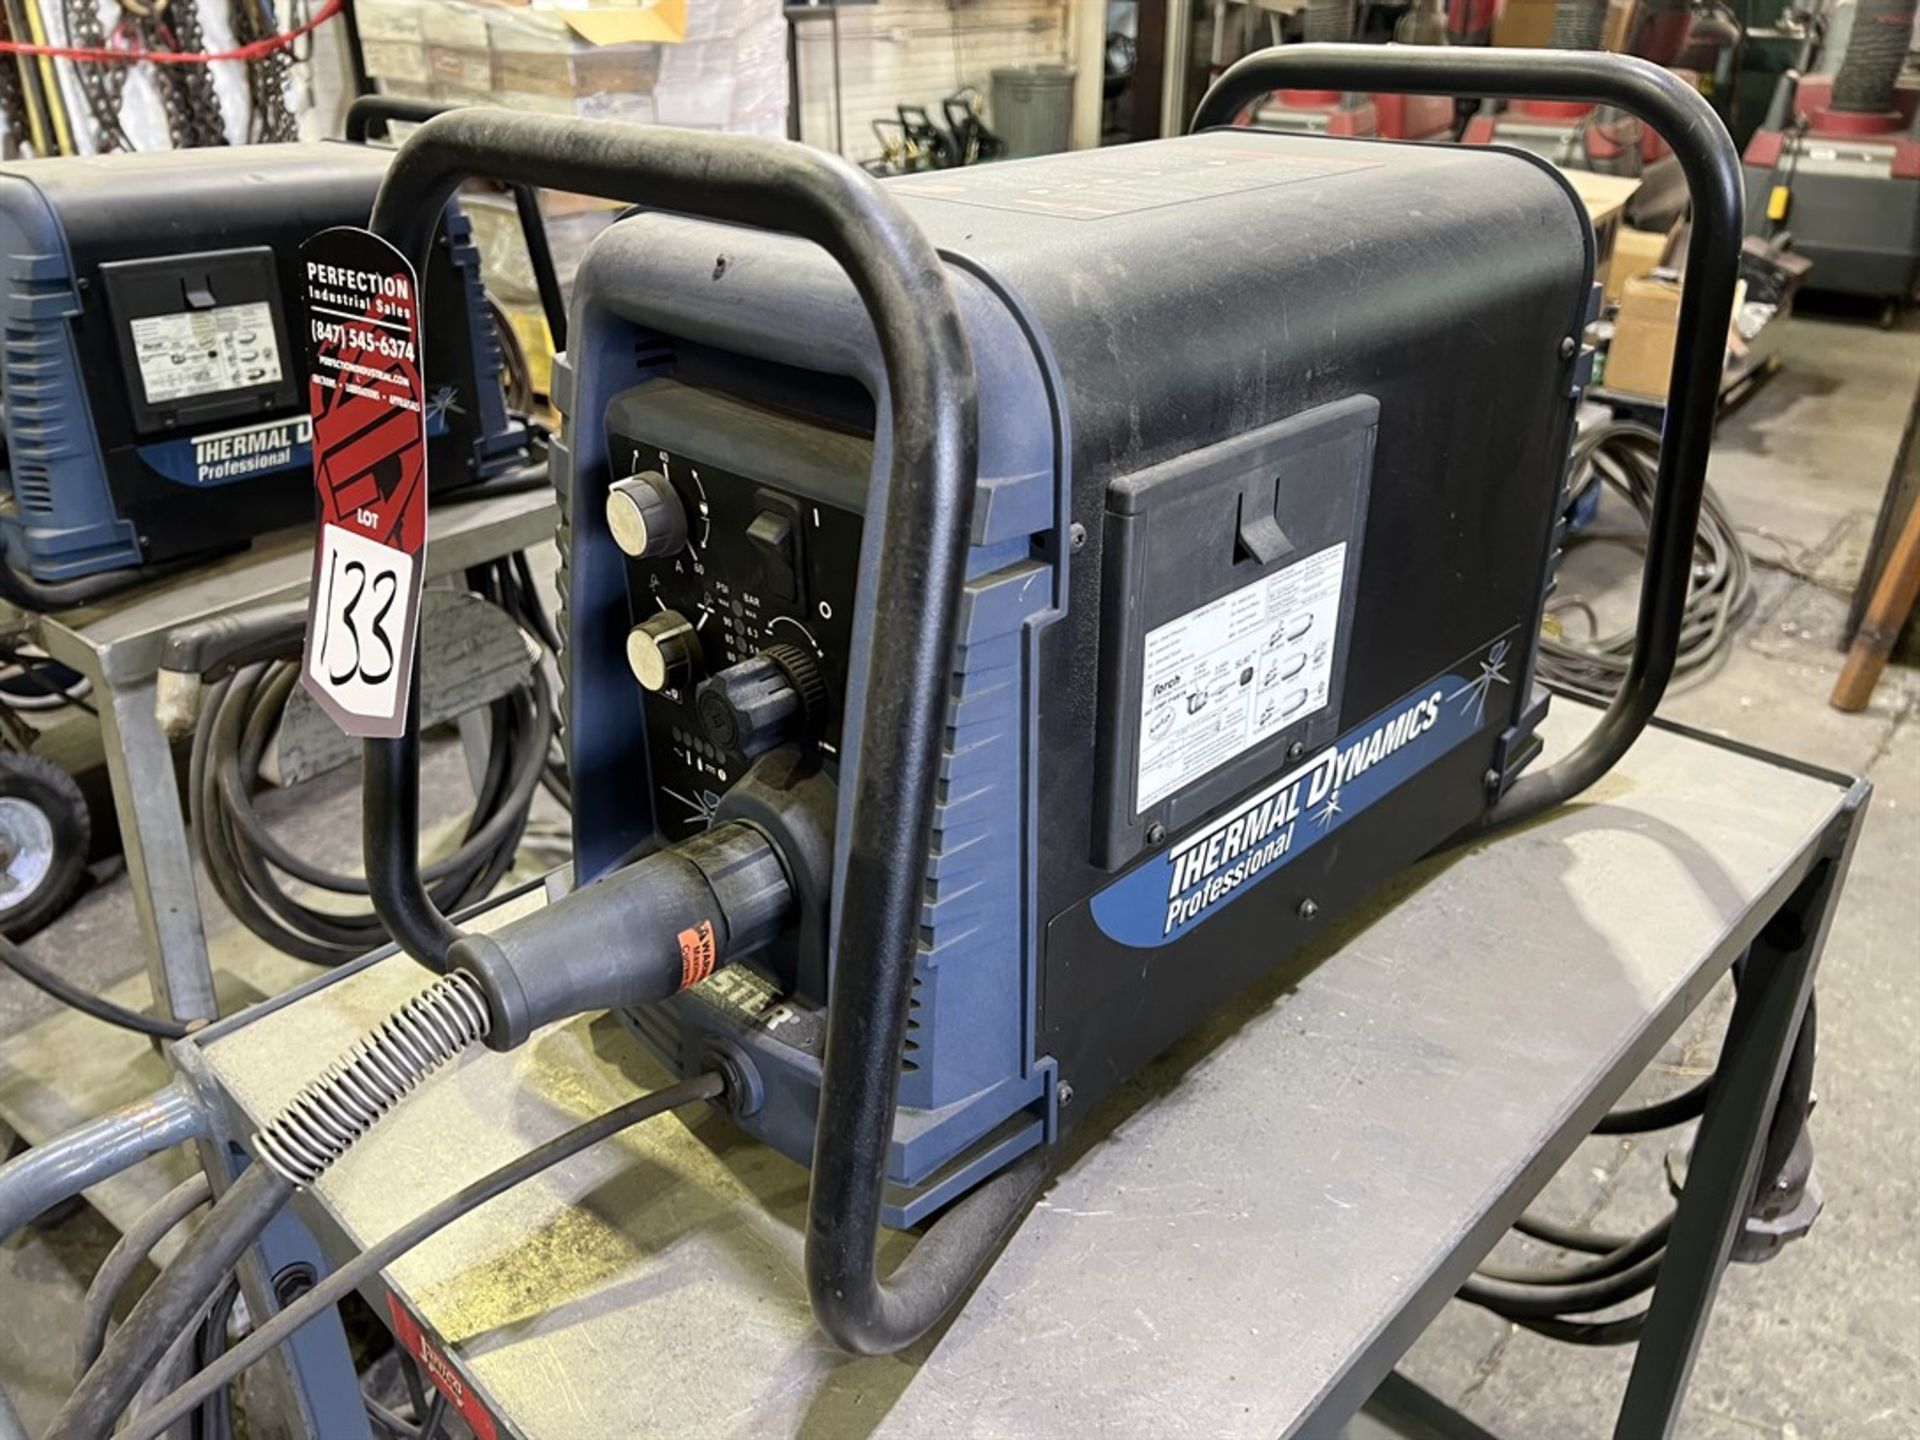 THERMAL DYNAMICS Professional Cutmaster 52 Plasma Cutter, s/n 057115591 (Building 44) - Image 2 of 3